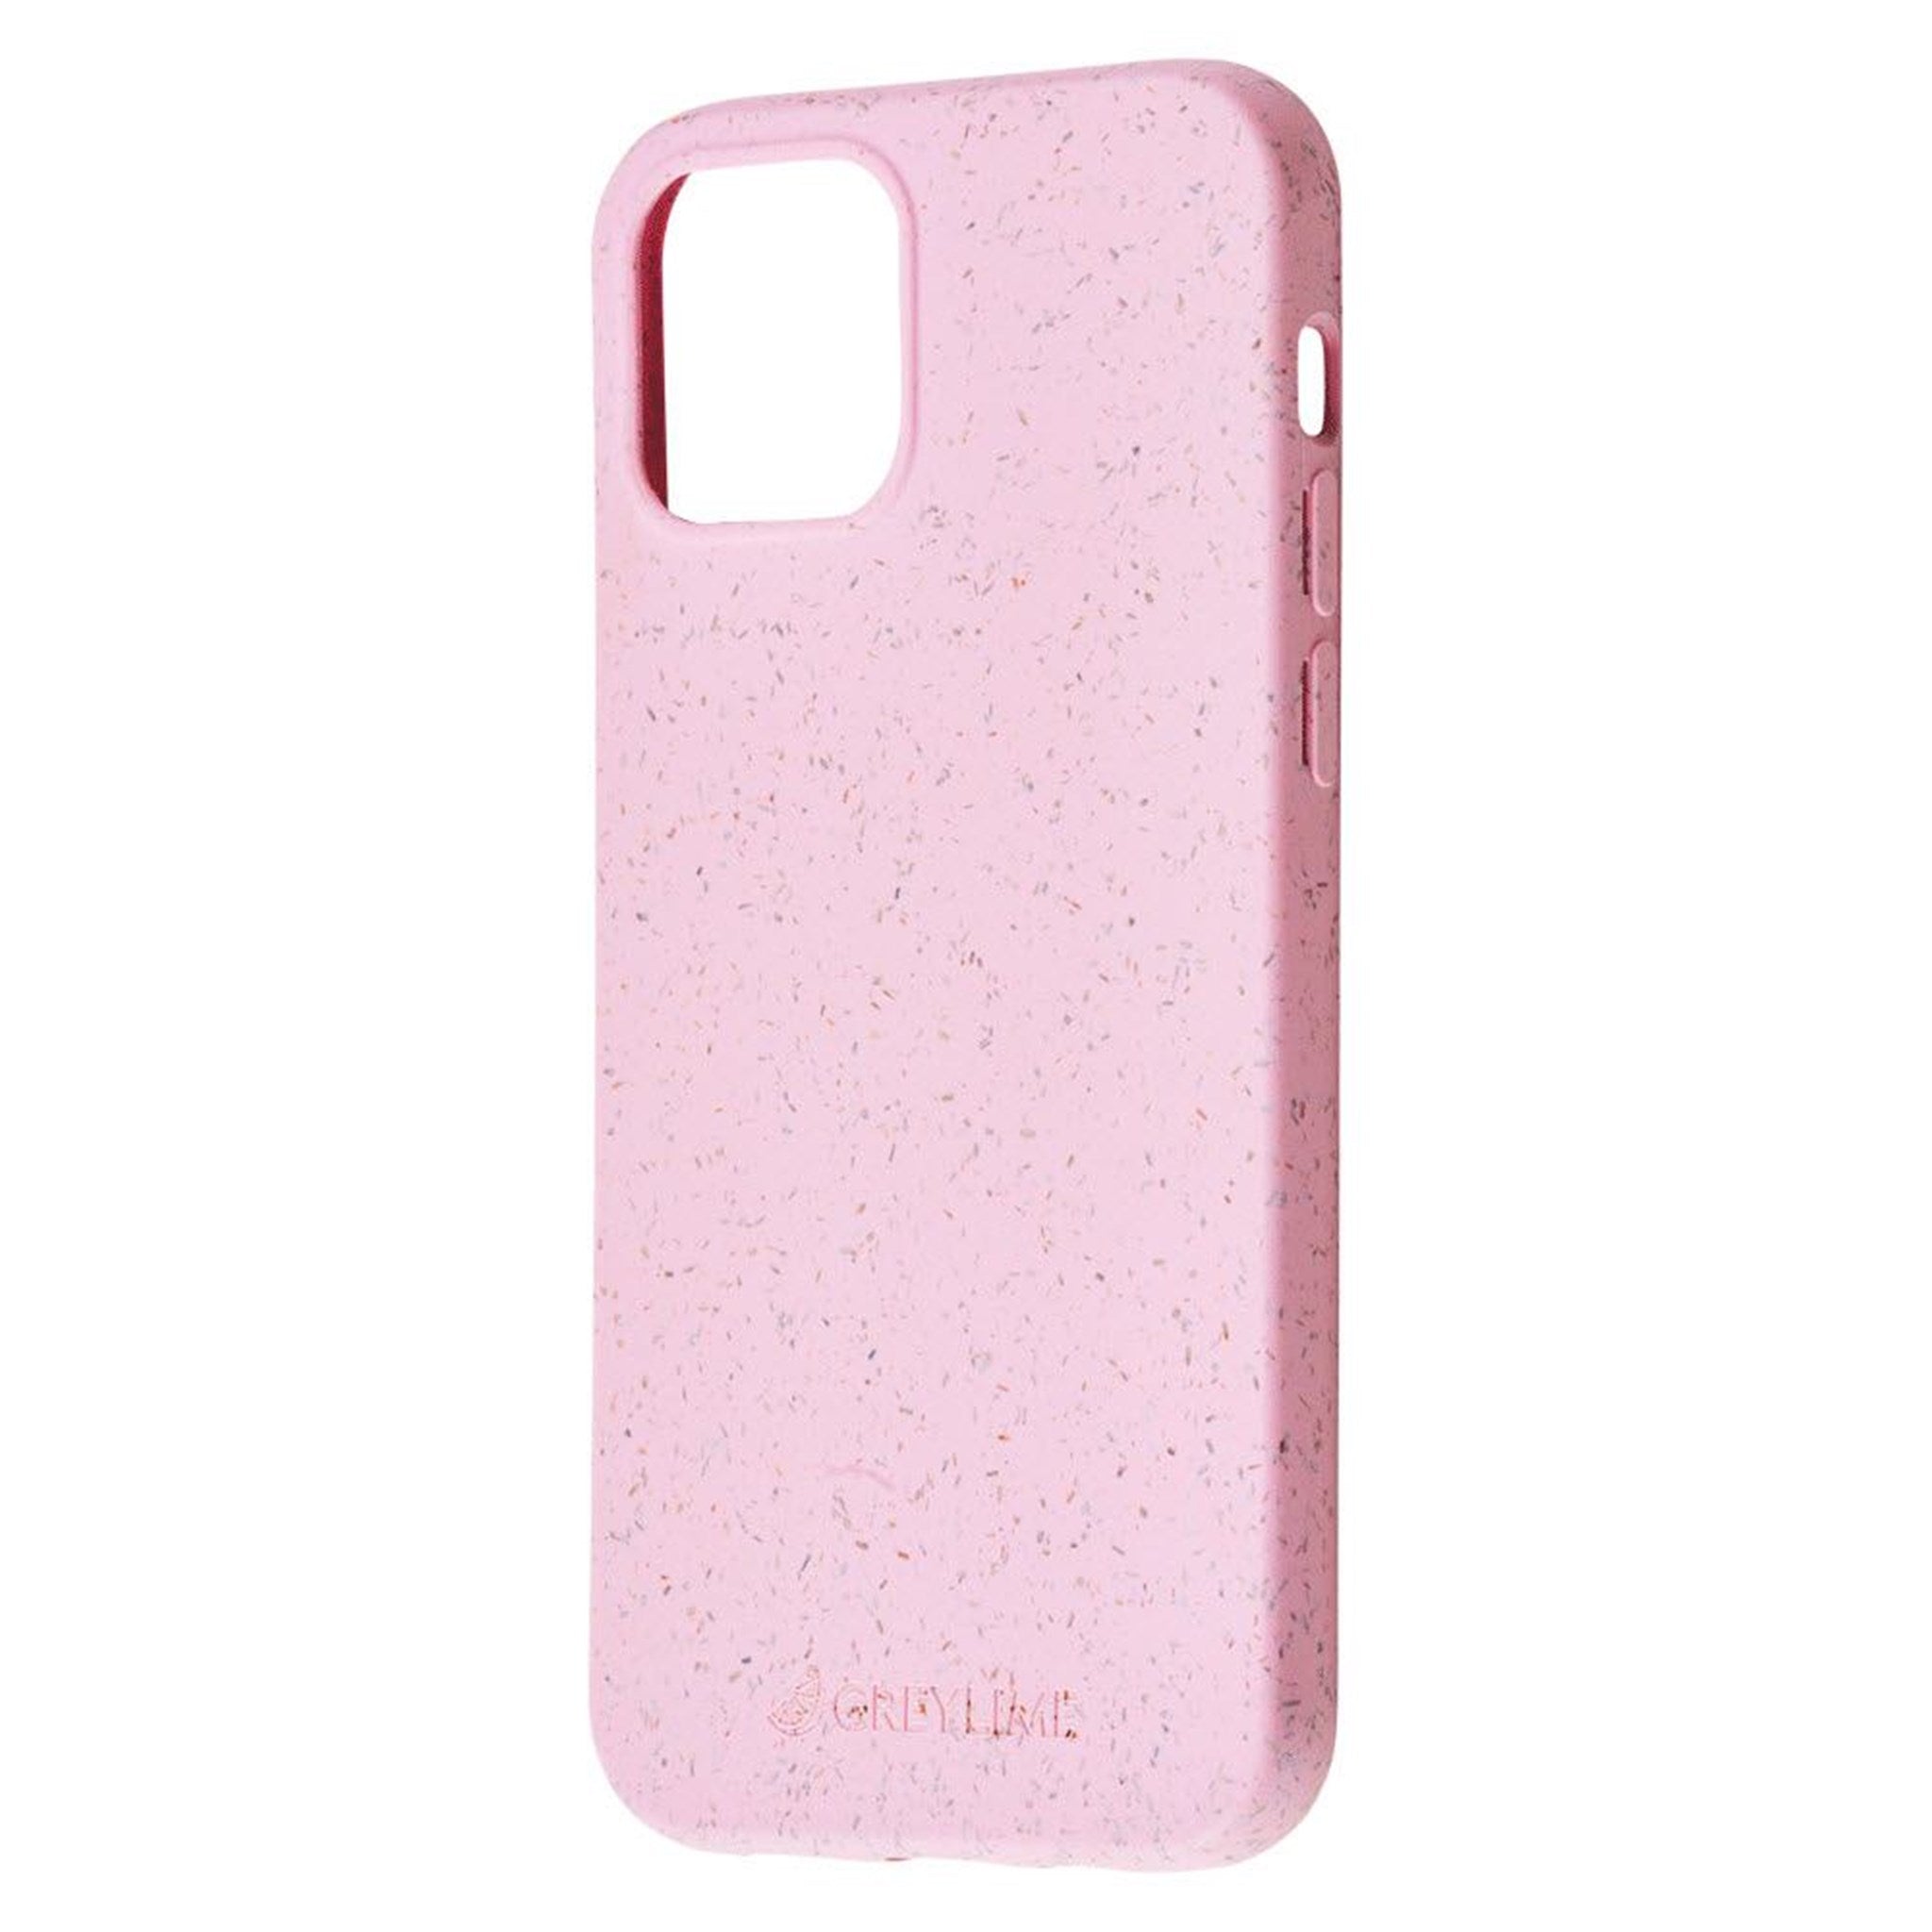 GreyLime-iPhone-12-12-Pro-Biodegdrable-Cover-Pink-COIP12M05-V2.jpg